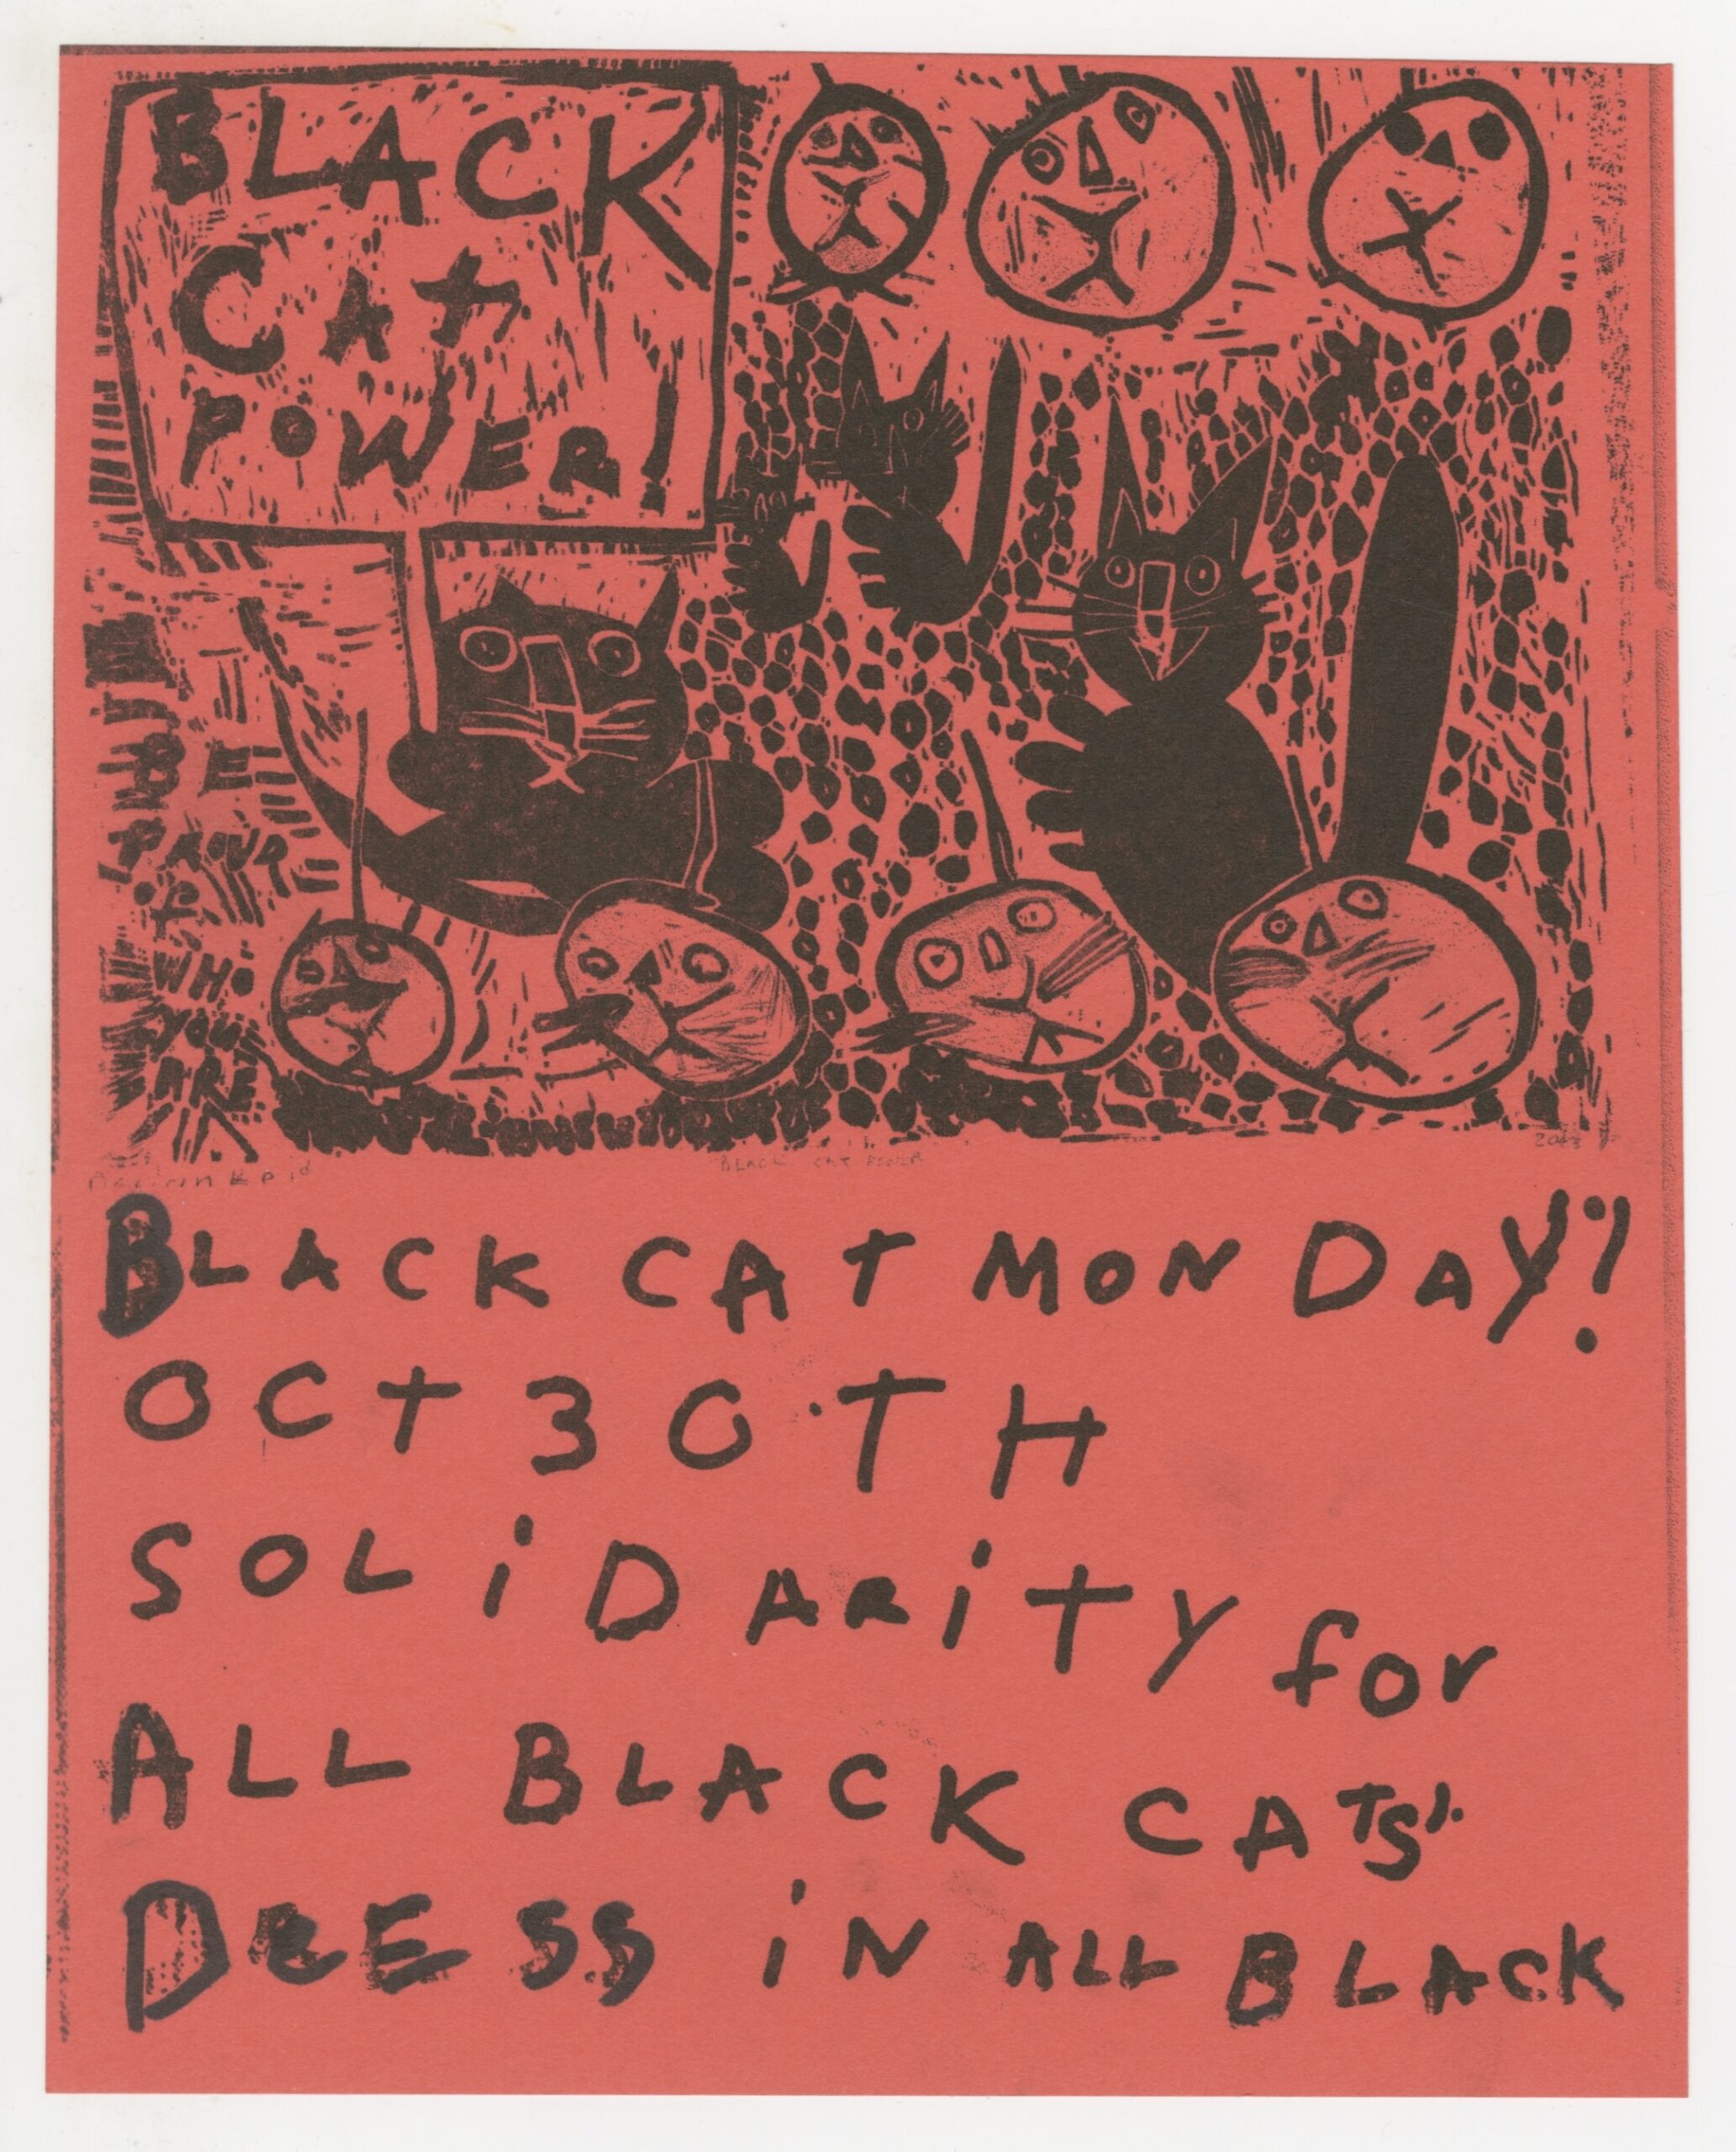 a handmade flyer with an image of black cats protesting. text reads "Black cat Monday! Oct 30th solidarity for all black cats. dress in all black.